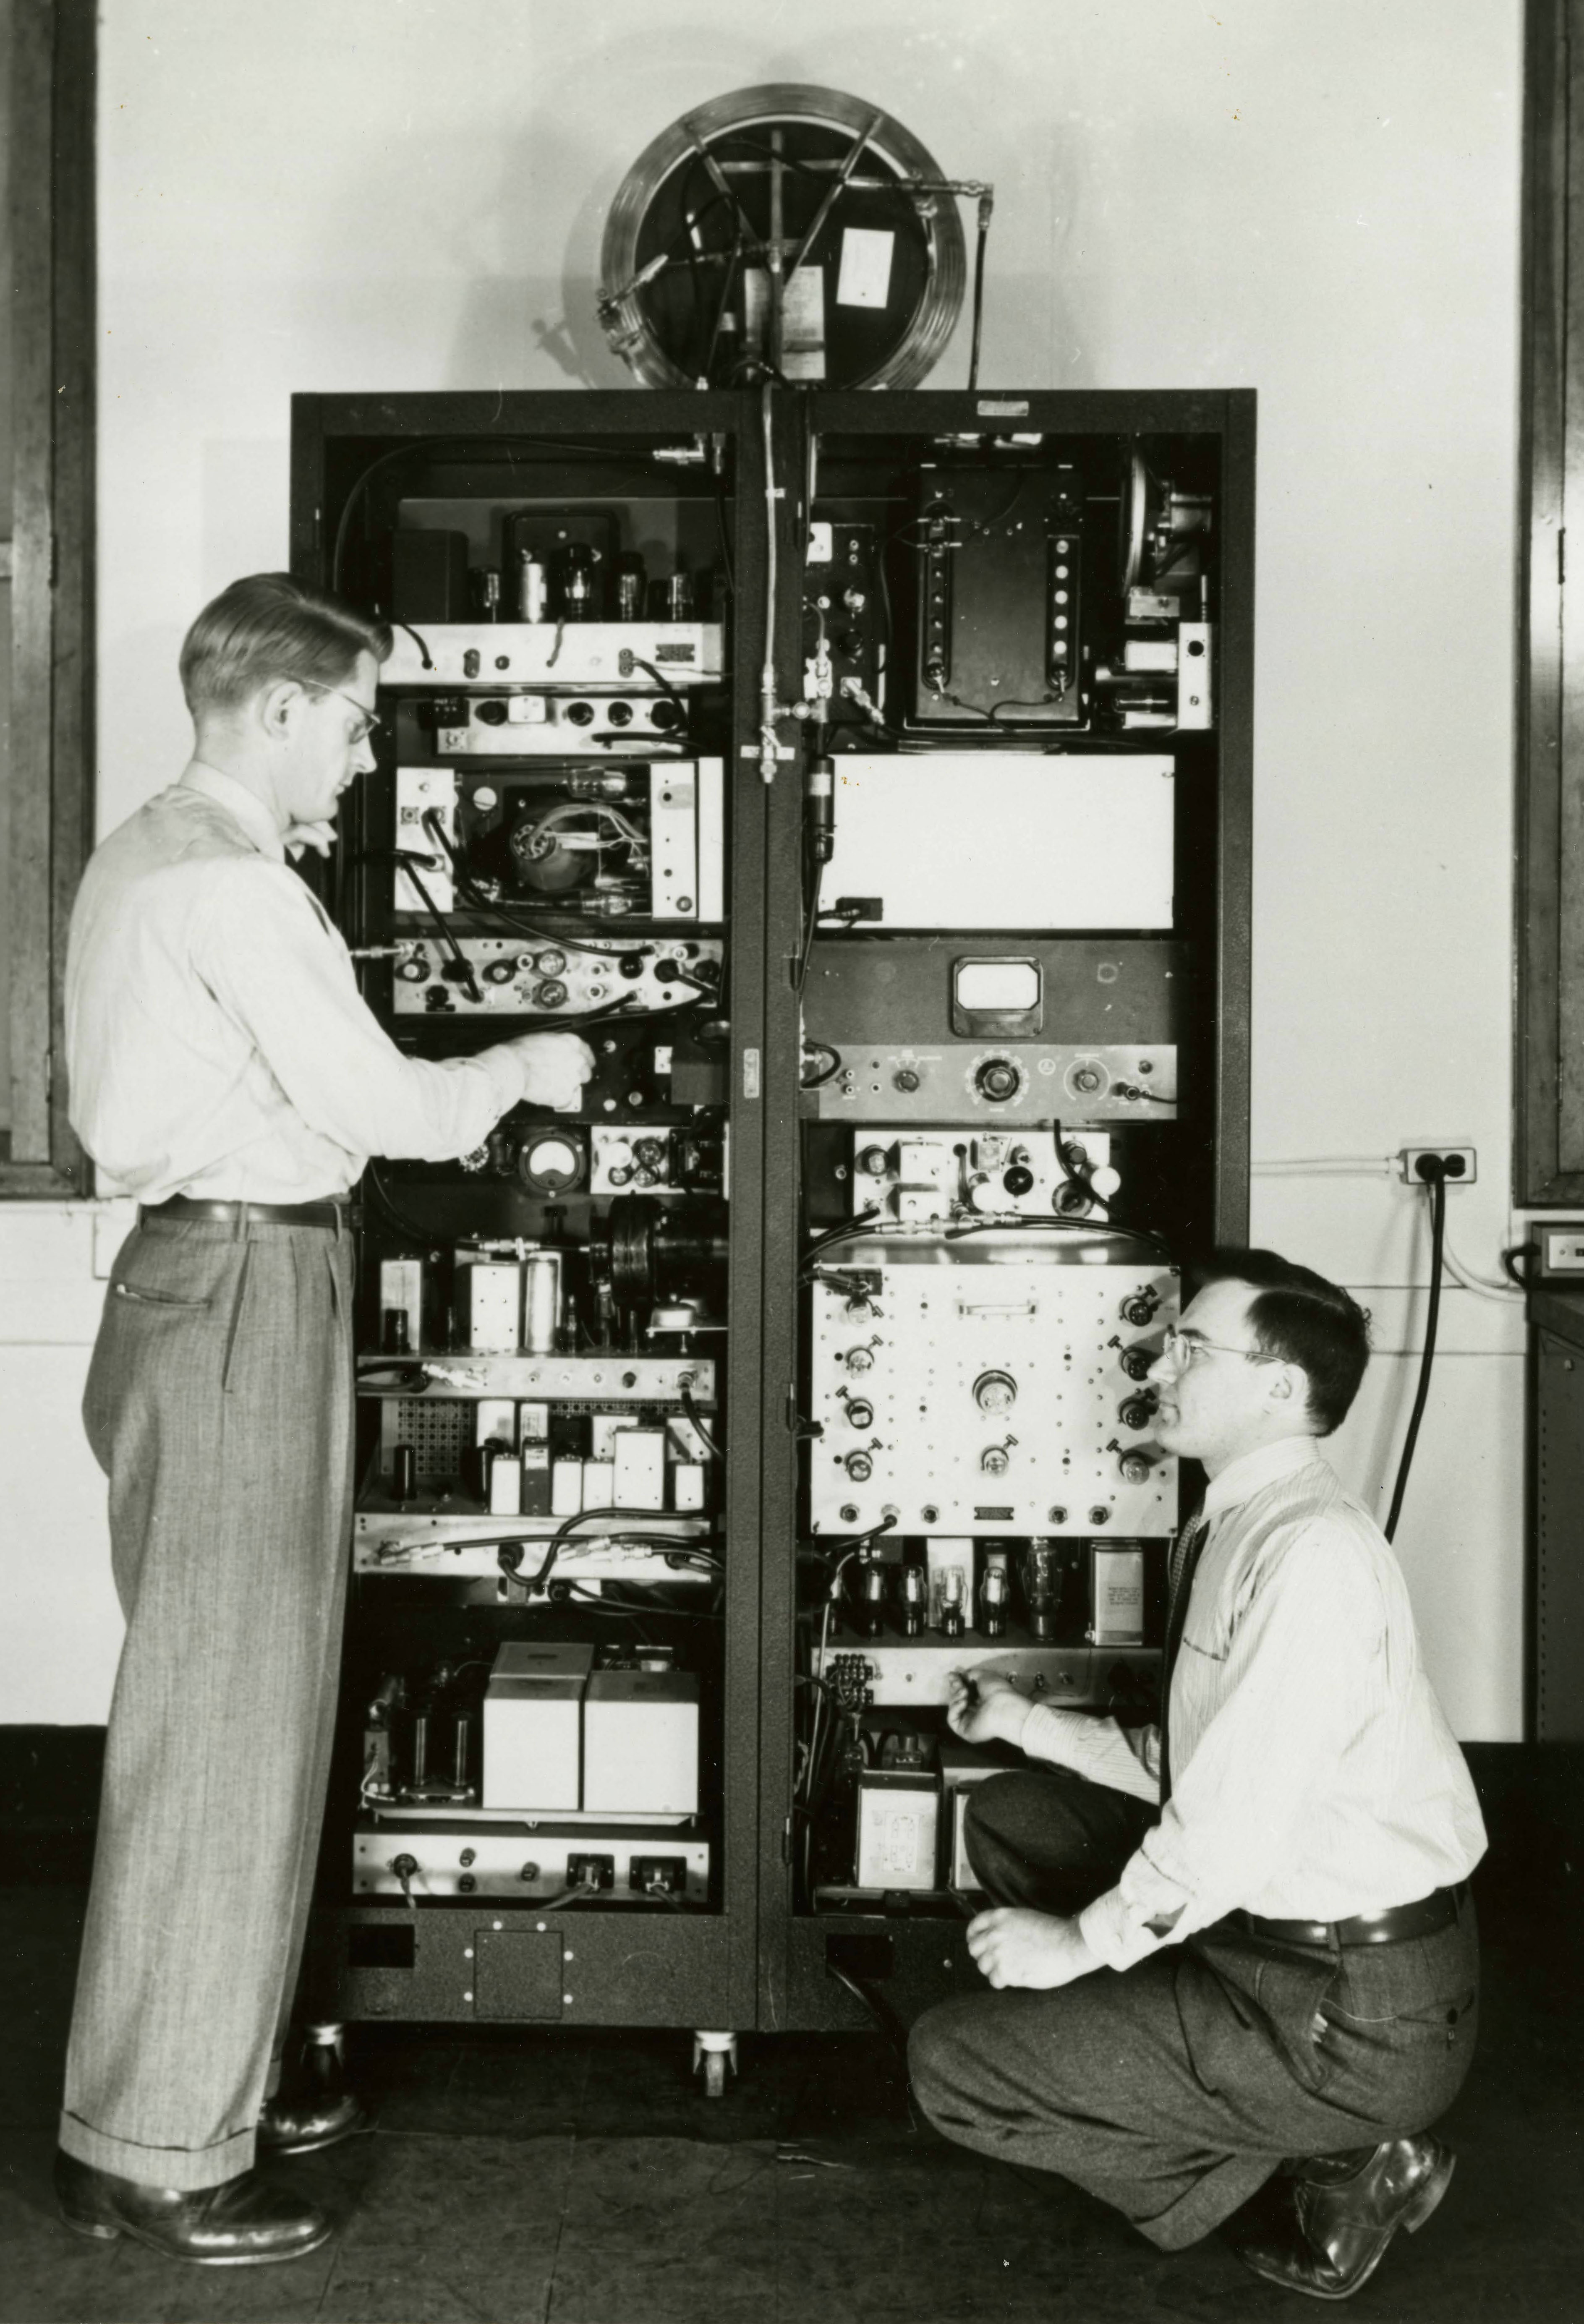 Photograph of Benjamin F. Husten and Emory D. Heberling adjusting the first NBS Atomic Clock, circa 1949.